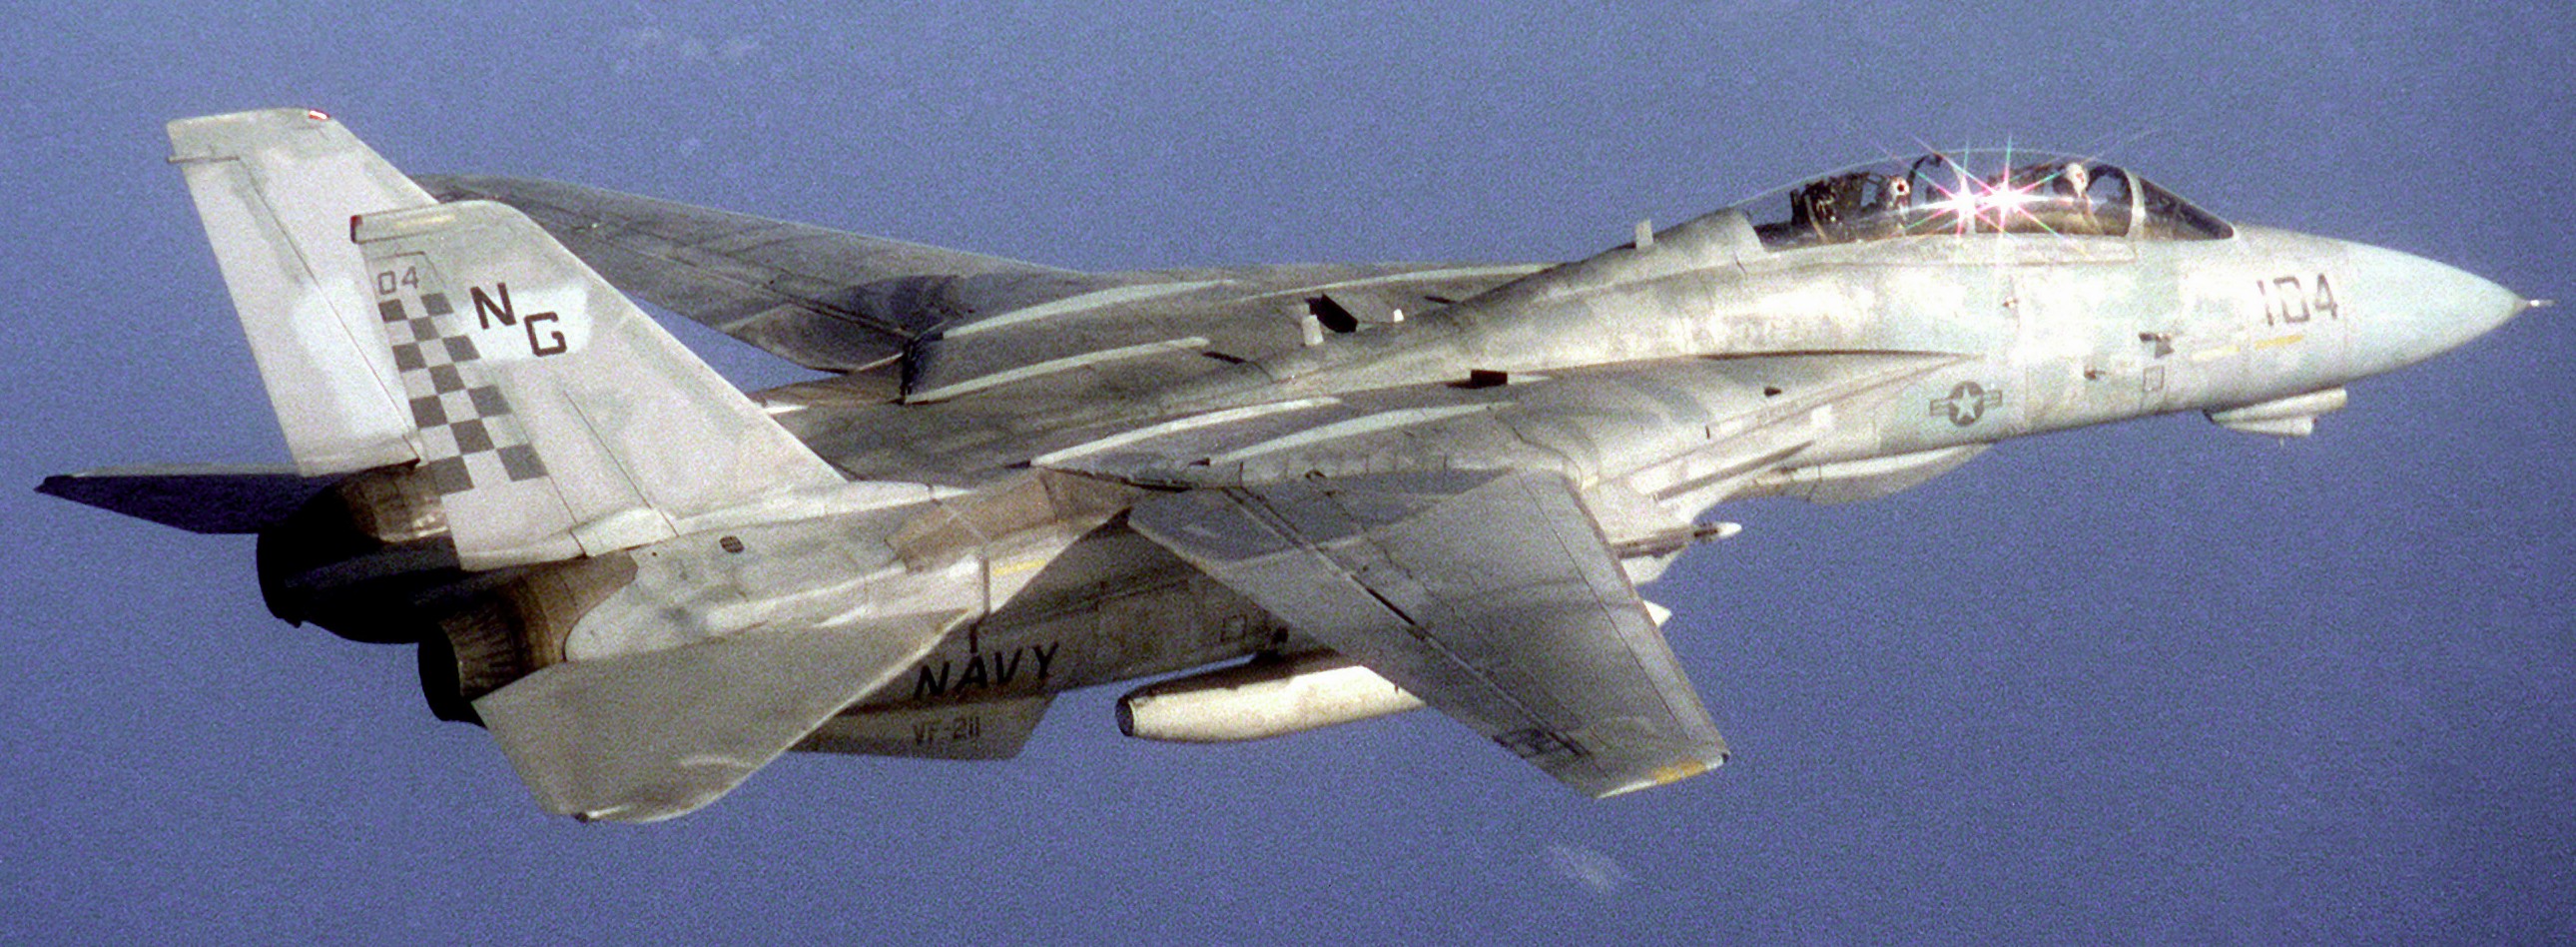 vf-211 fighting checkmates fighter squadron f-14a tomcat us navy carrier air wing cvw-9 uss kitty hawk cv-63 81